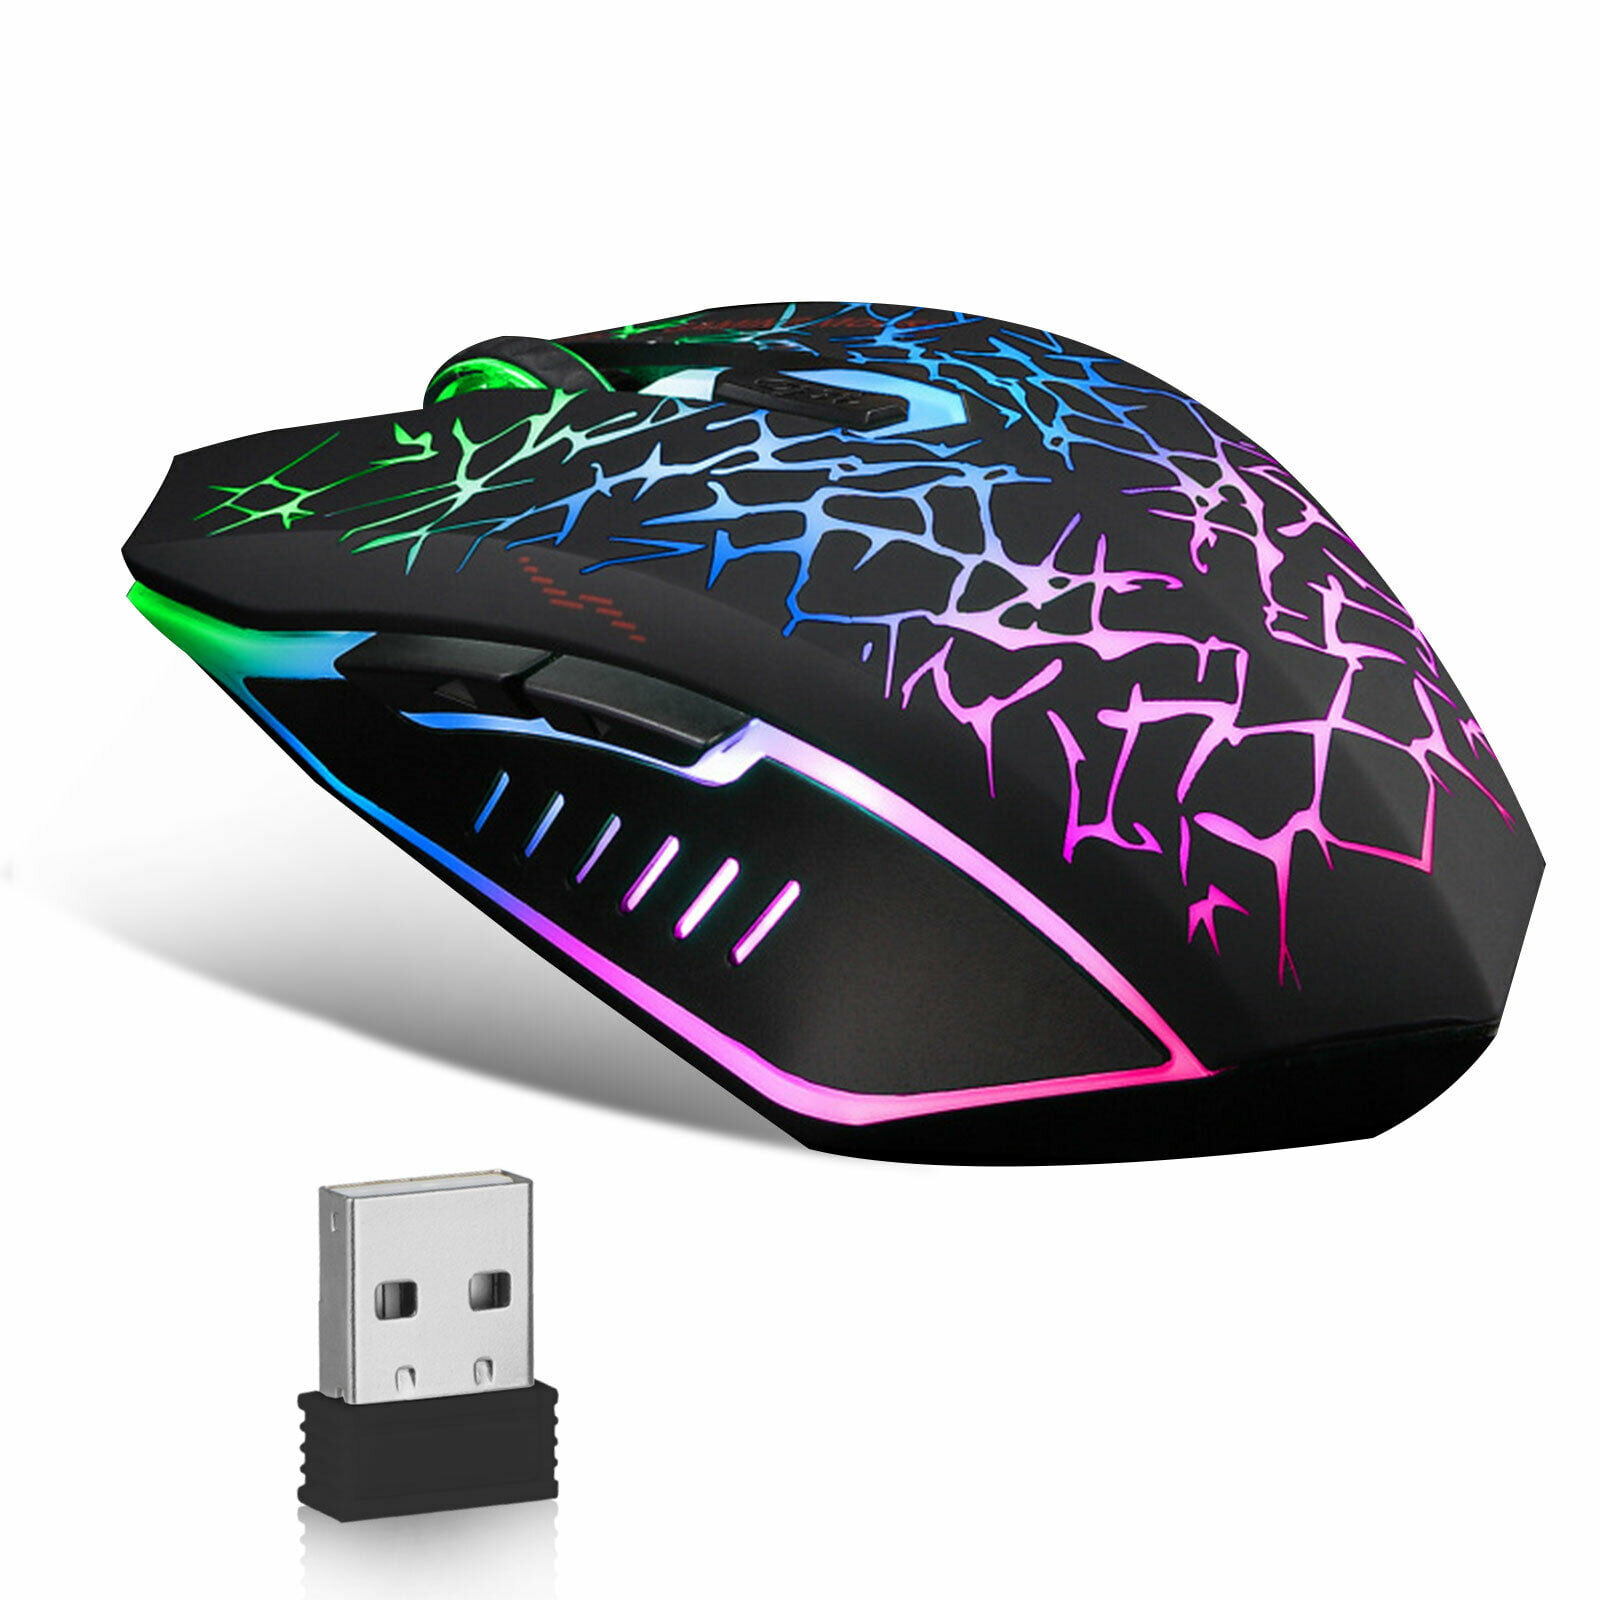 Eeekit 2 4g Wireless Gaming Mouse Rechargeable Silent Optical Mice 7 Colors Led Lights 6